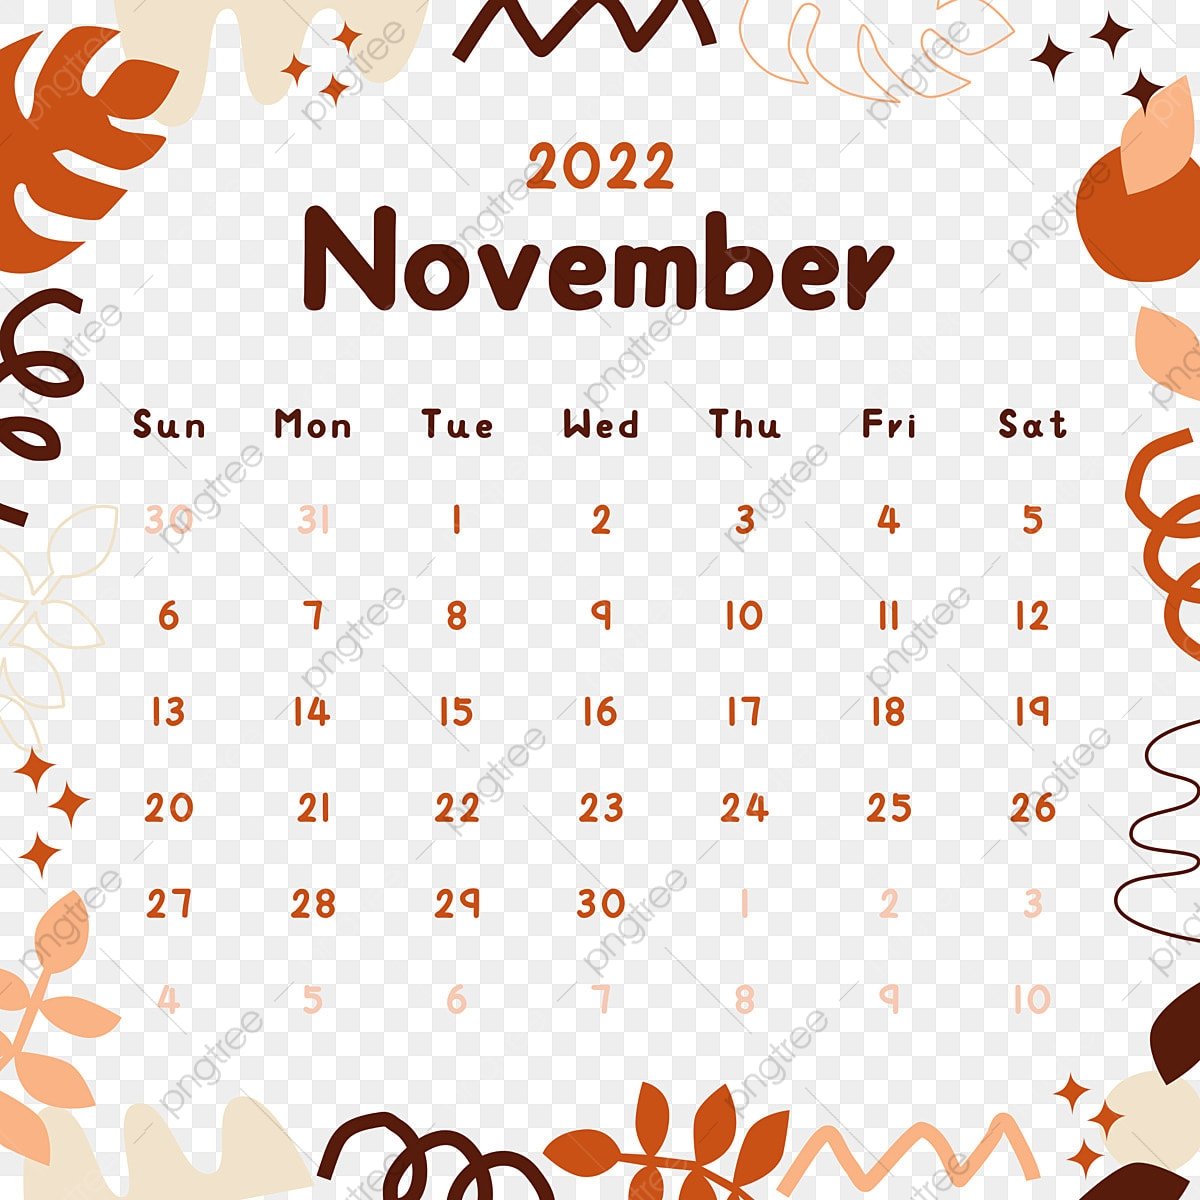 November 2022 Monthly Calendar PNG, Vector, PSD, and Clipart With Transparent Backgrounds for Free Download